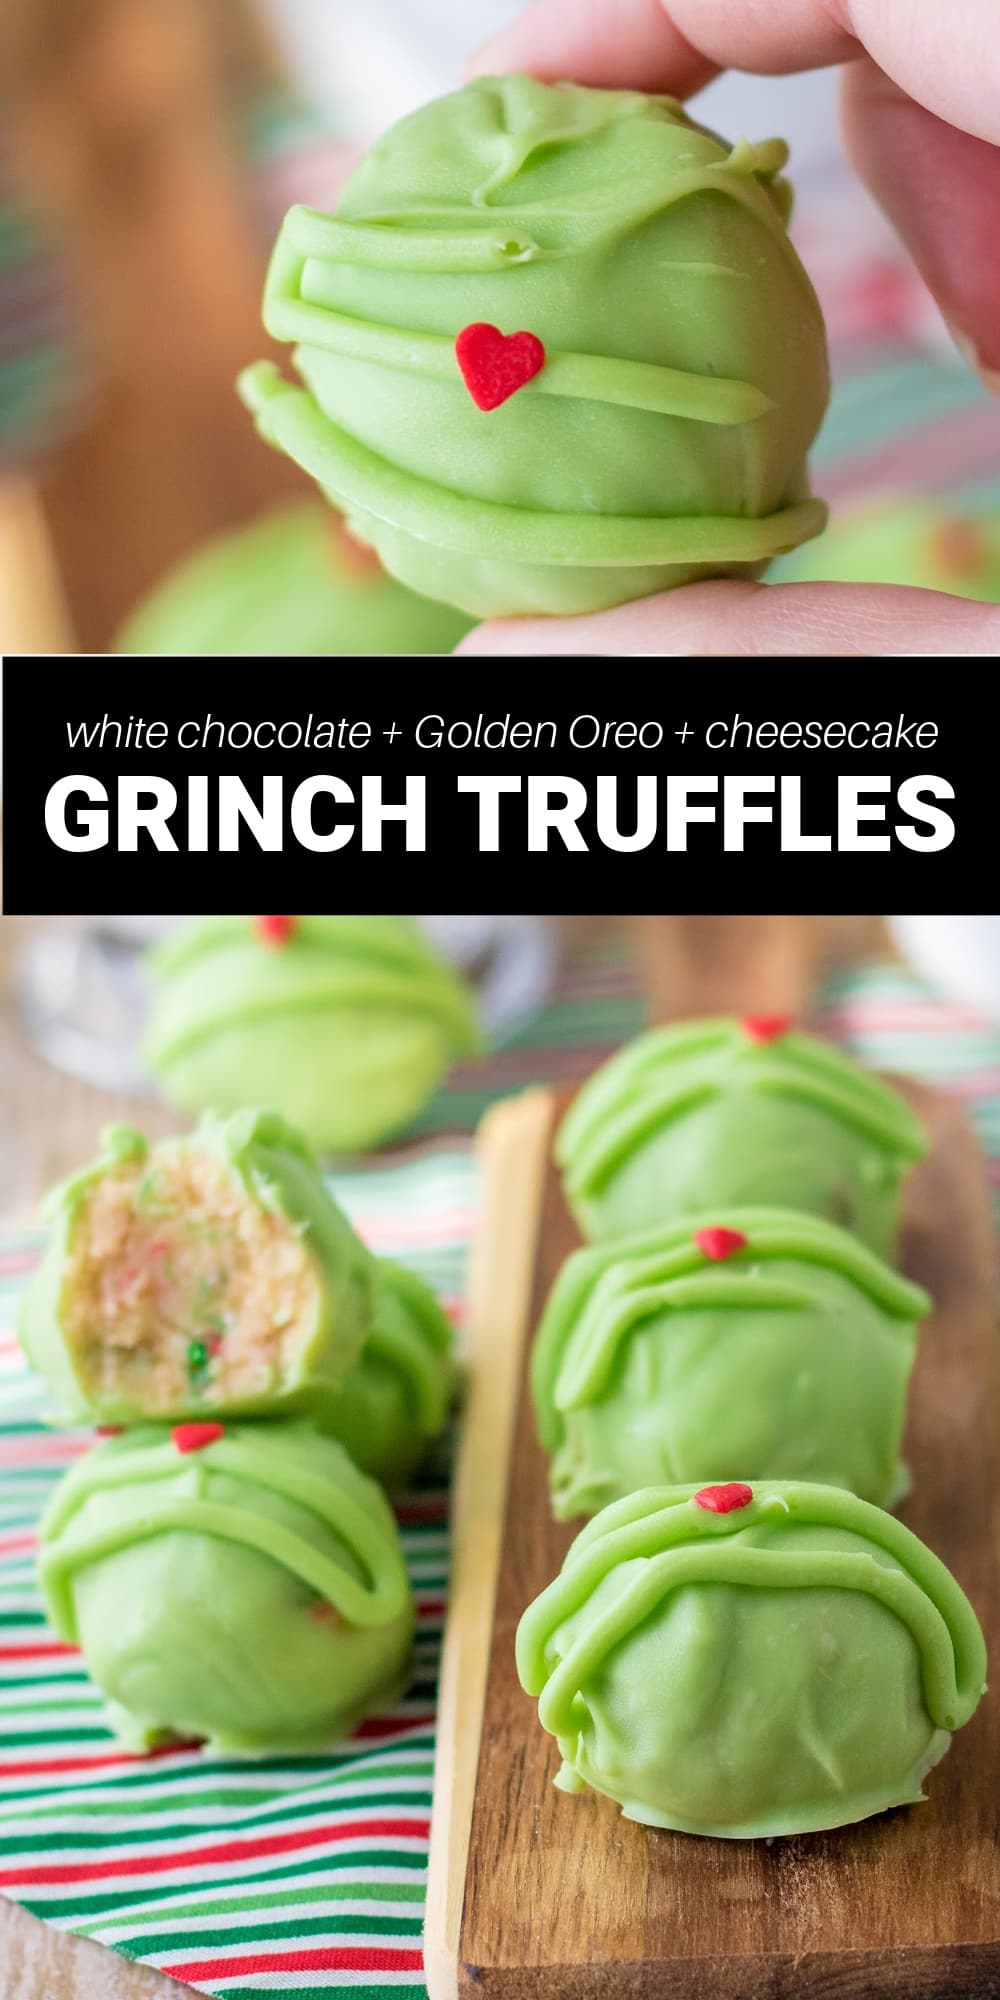 These adorable Grinch truffles are a fun and delicious addition to any Christmas gathering. With rich golden Oreo cream cheese filling and a sweet and creamy chocolate coating, these easy treats are decadent enough to satisfy any sweet tooth. 